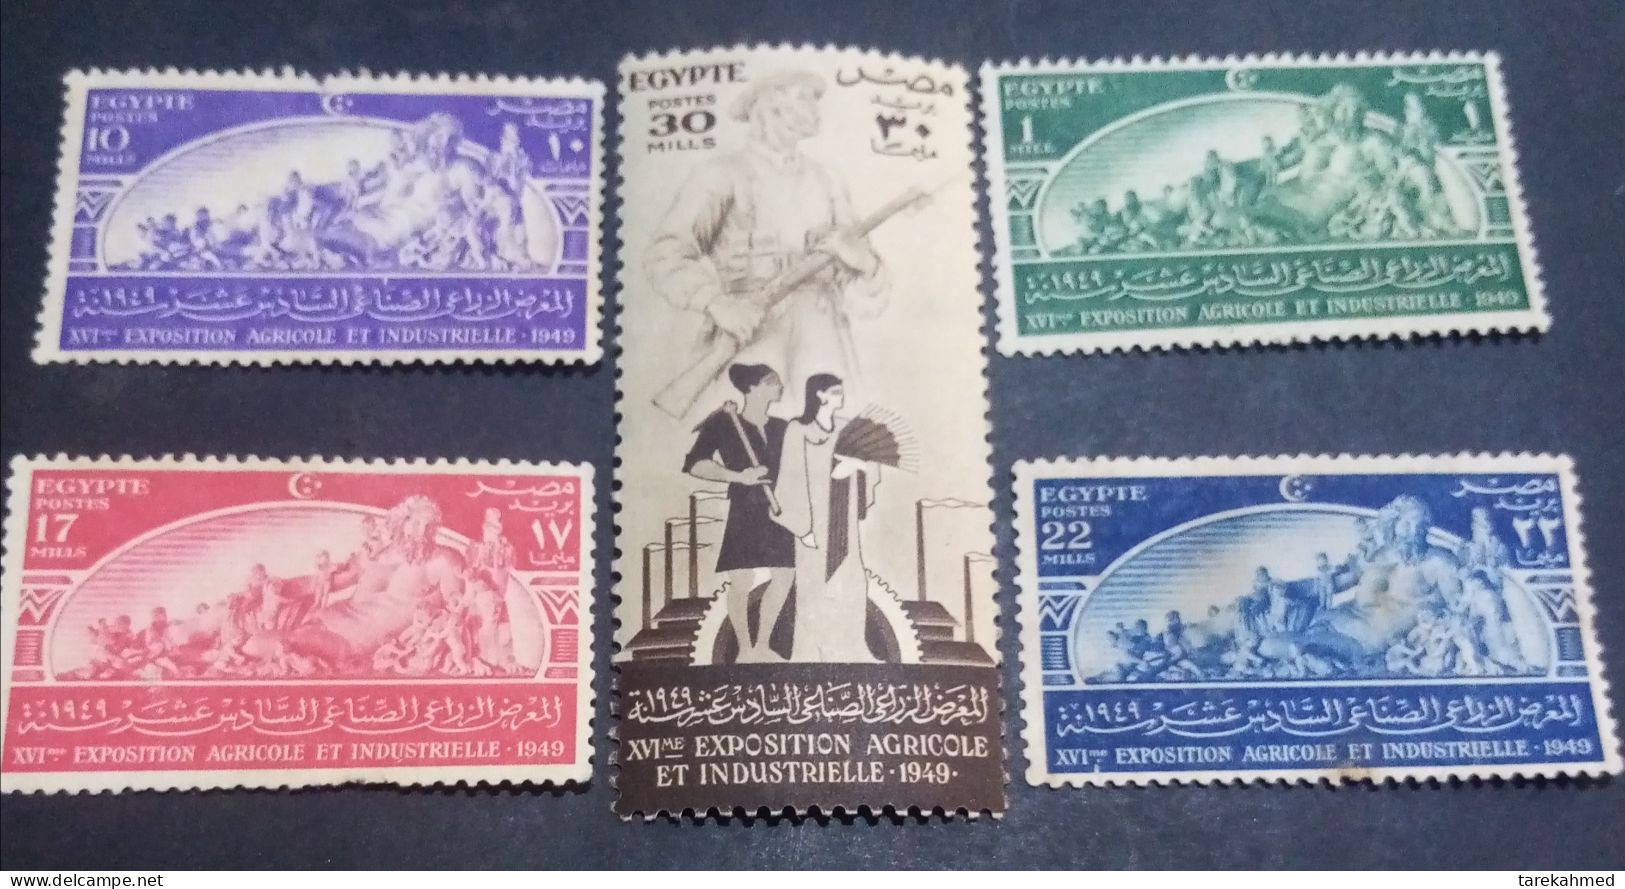 EGYPT KINGDOM 1949 , AGRICULTURE & INDUSTRY EXPOSITION S.G. 352-356 . 2 Used Stamps - Ongebruikt